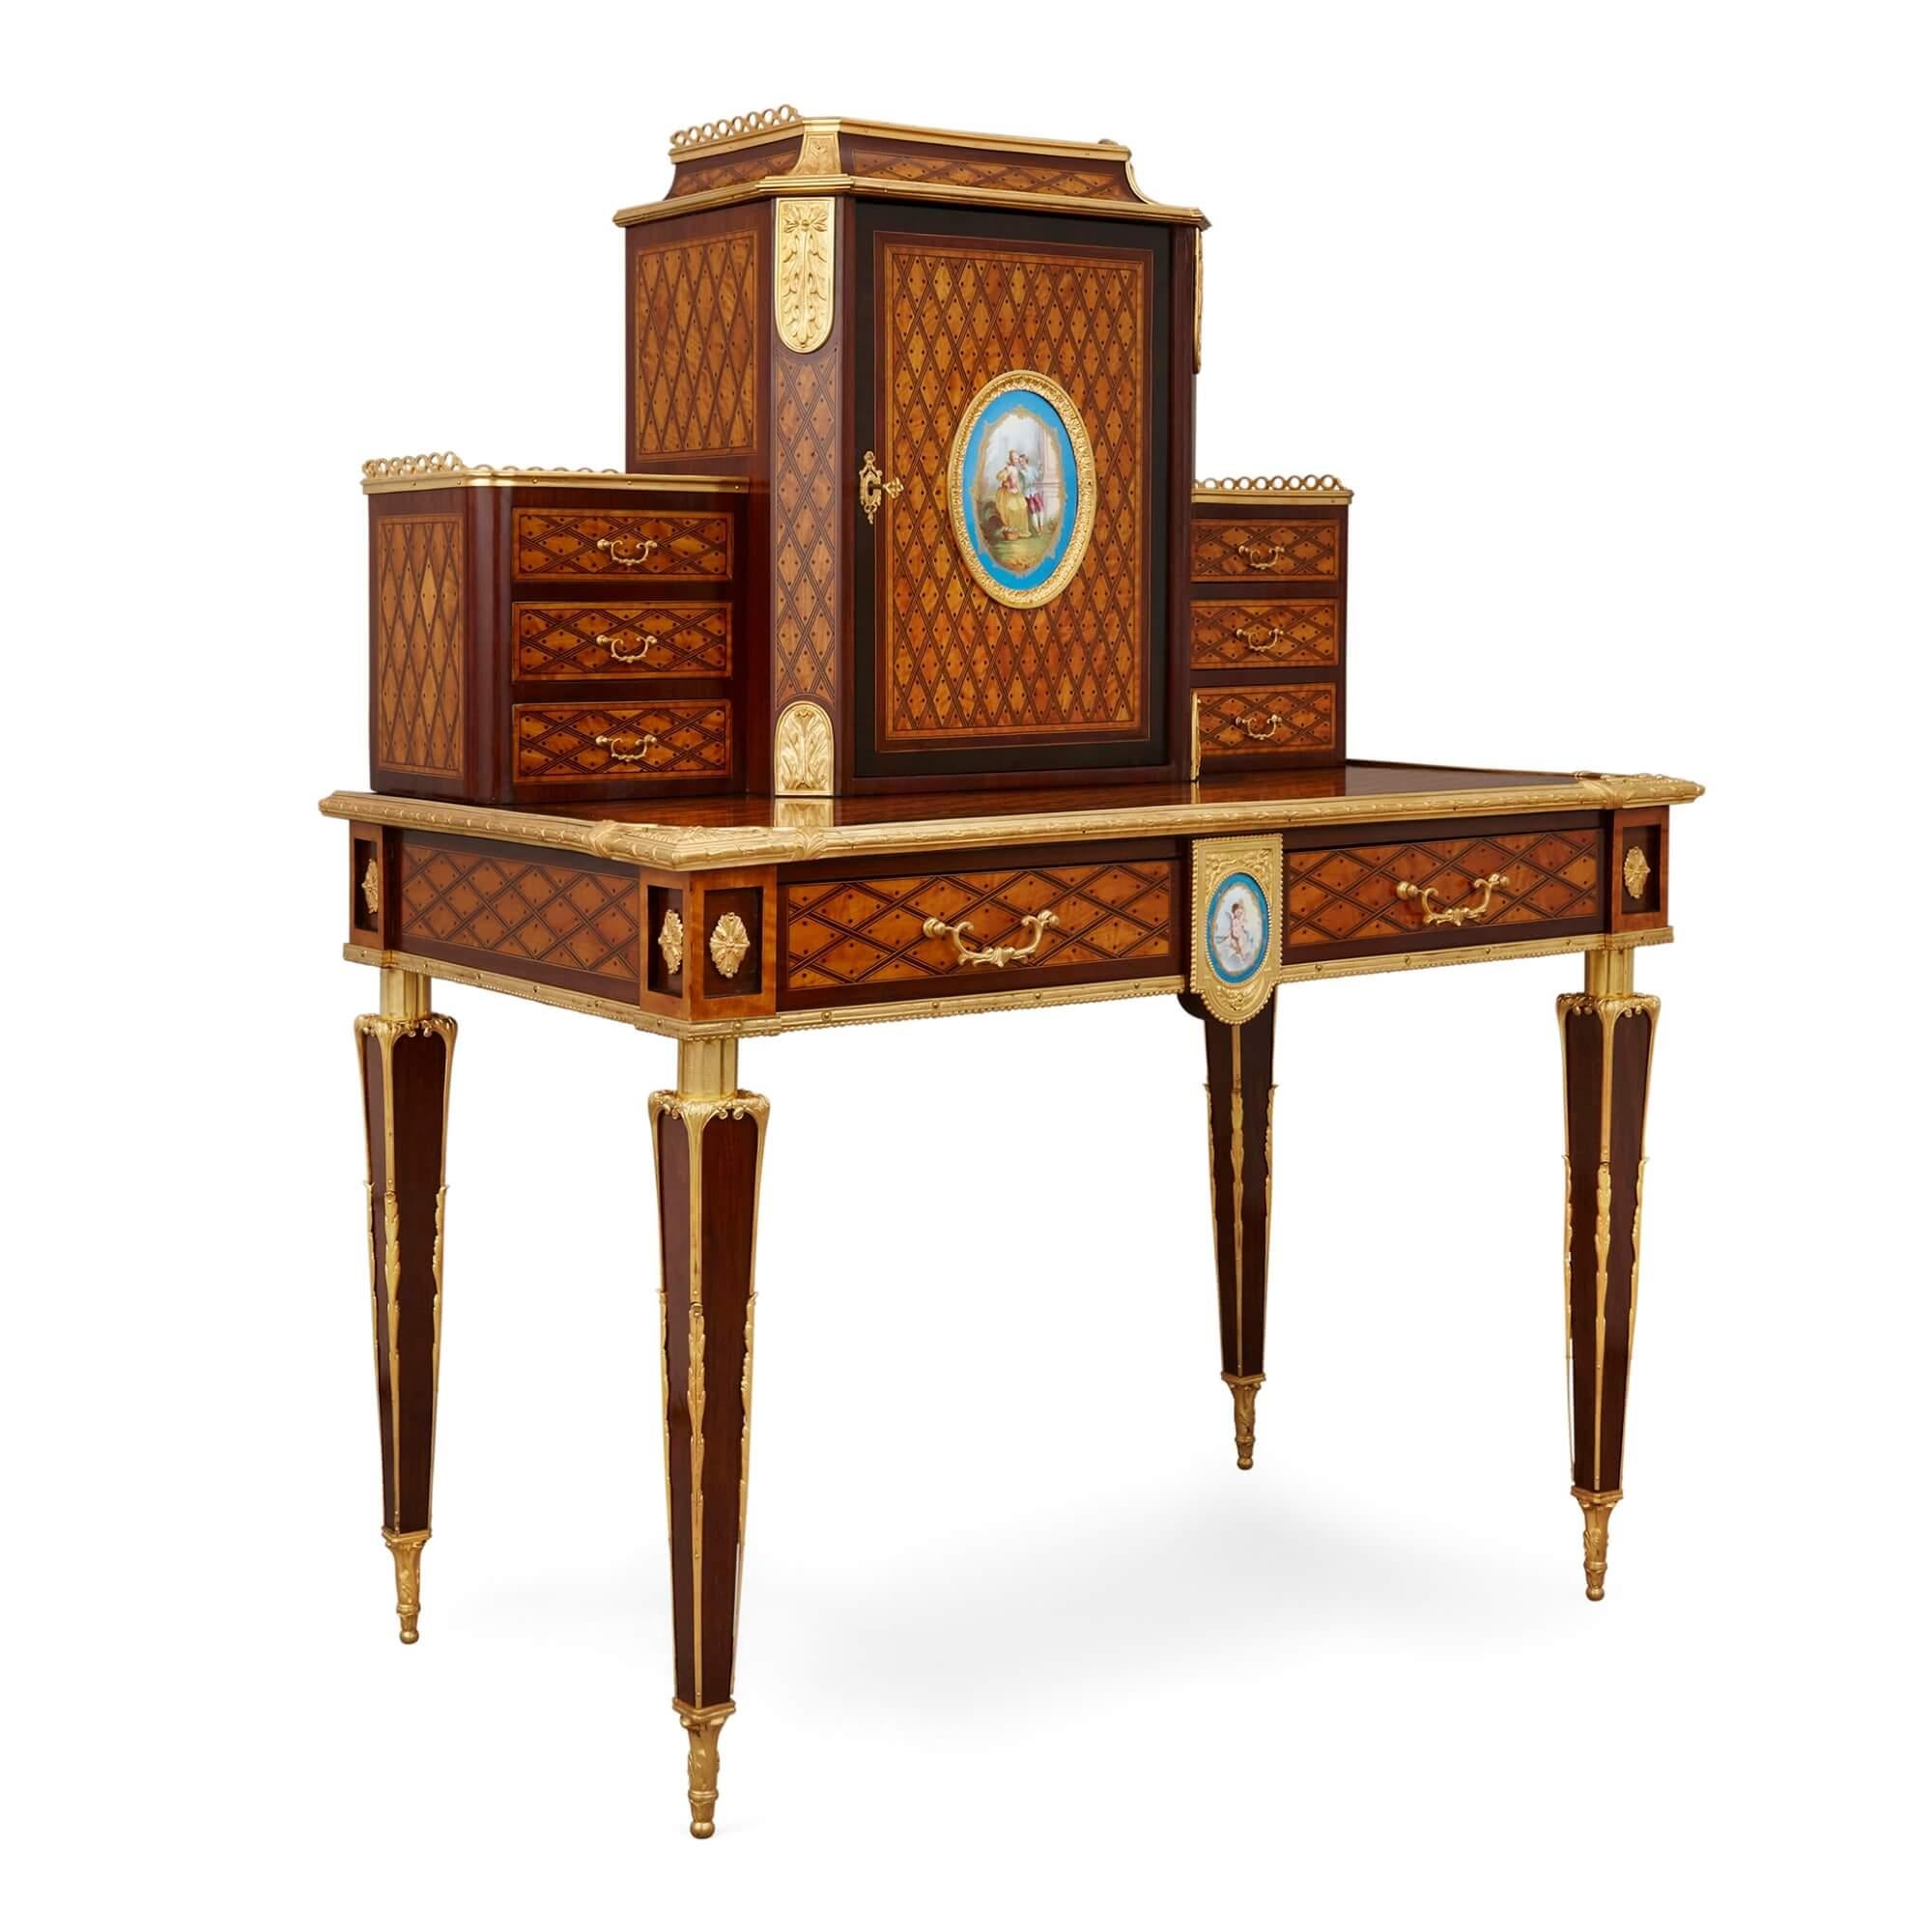 Porcelain and ormolu mounted bonheur du jour by Donald Ross.
English, late 19th century.
Measures: height 136cm, width 108cm, depth 62cm

This beautiful writing desk is a 'bonheur du jour', a type of desk traditionally used by upper class French